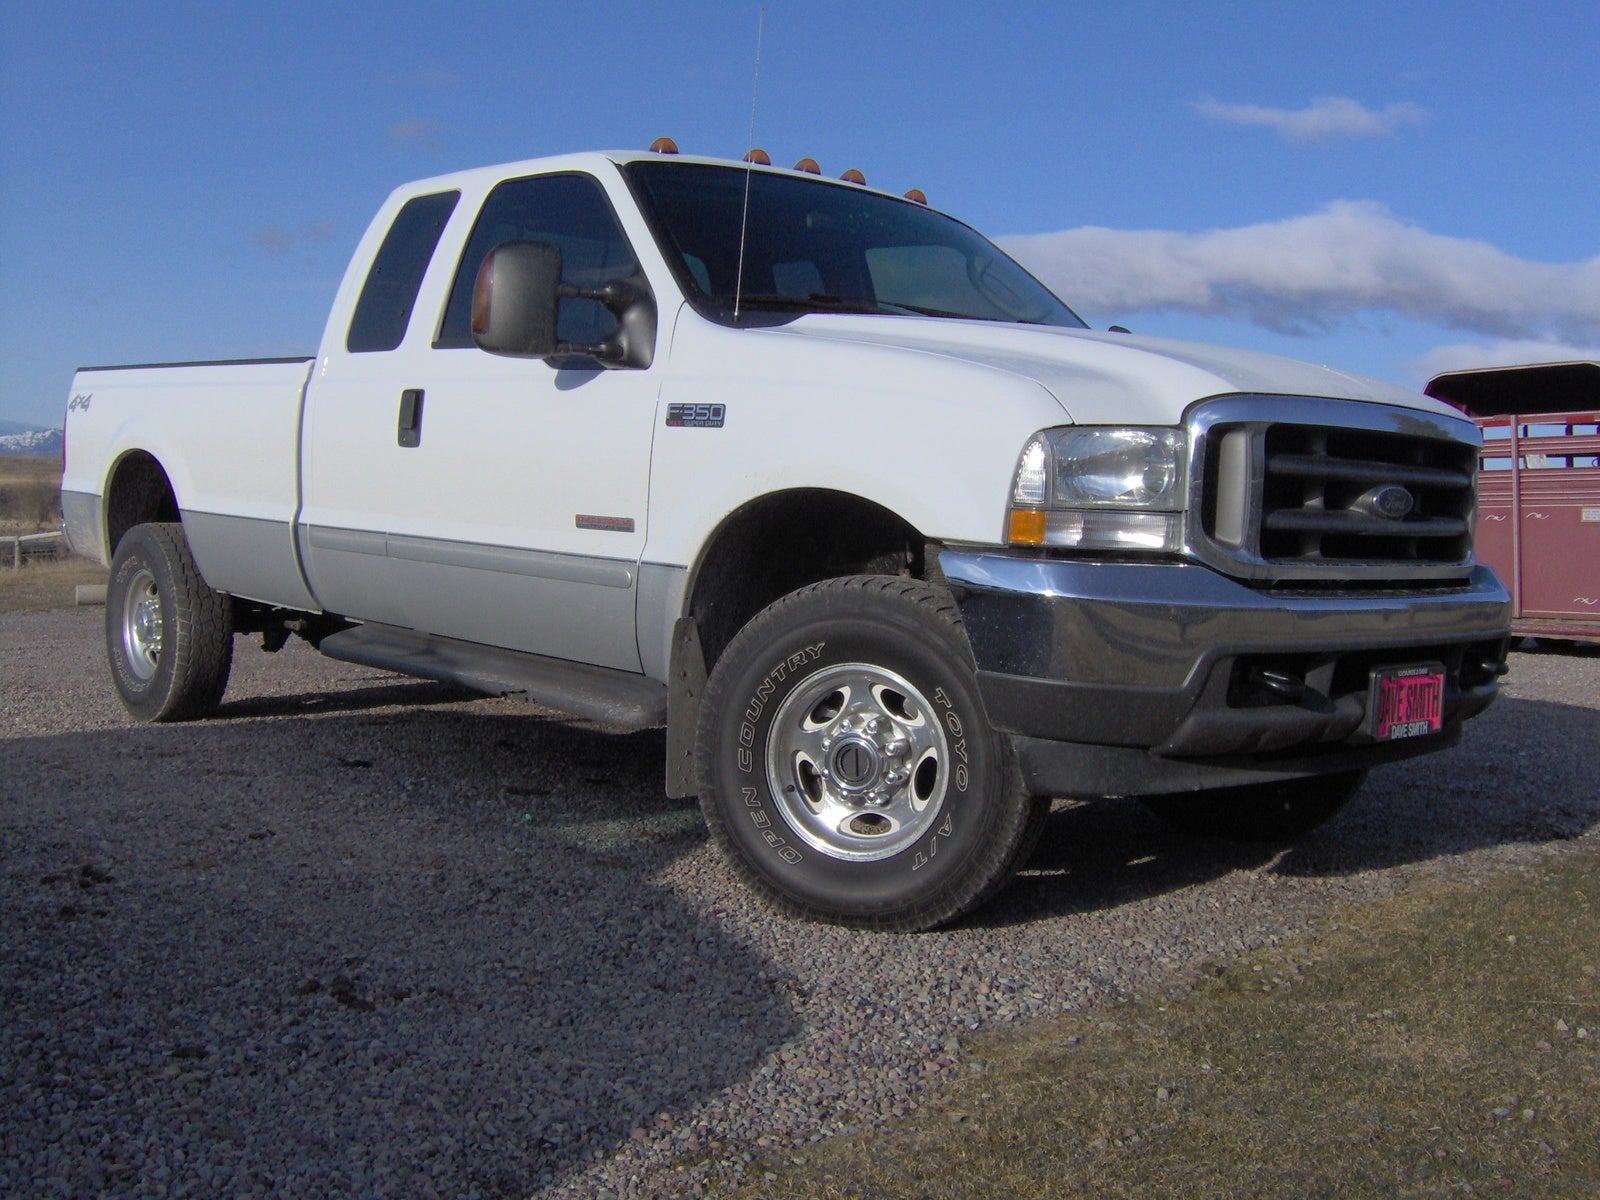 2004 ford f250 diesel value